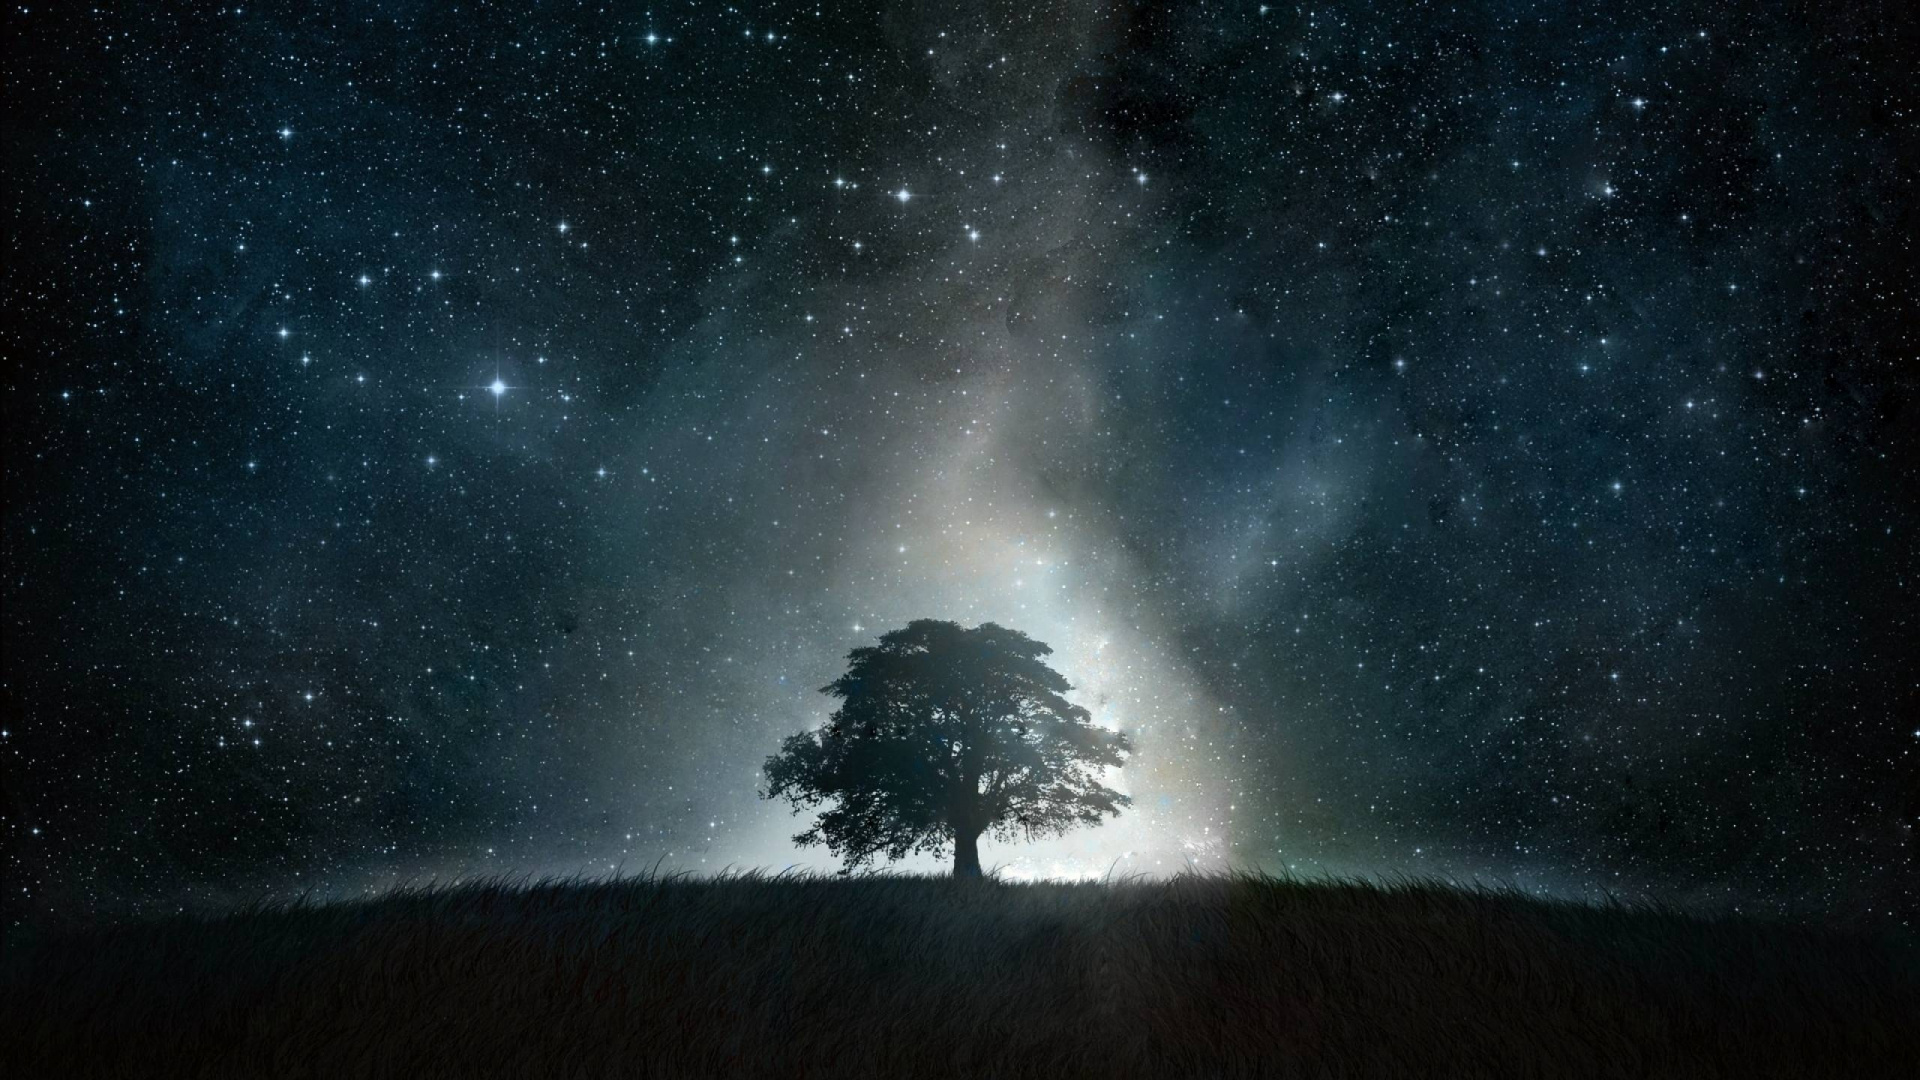 Silhouette of Tree Under Starry Night. Wallpaper in 1920x1080 Resolution